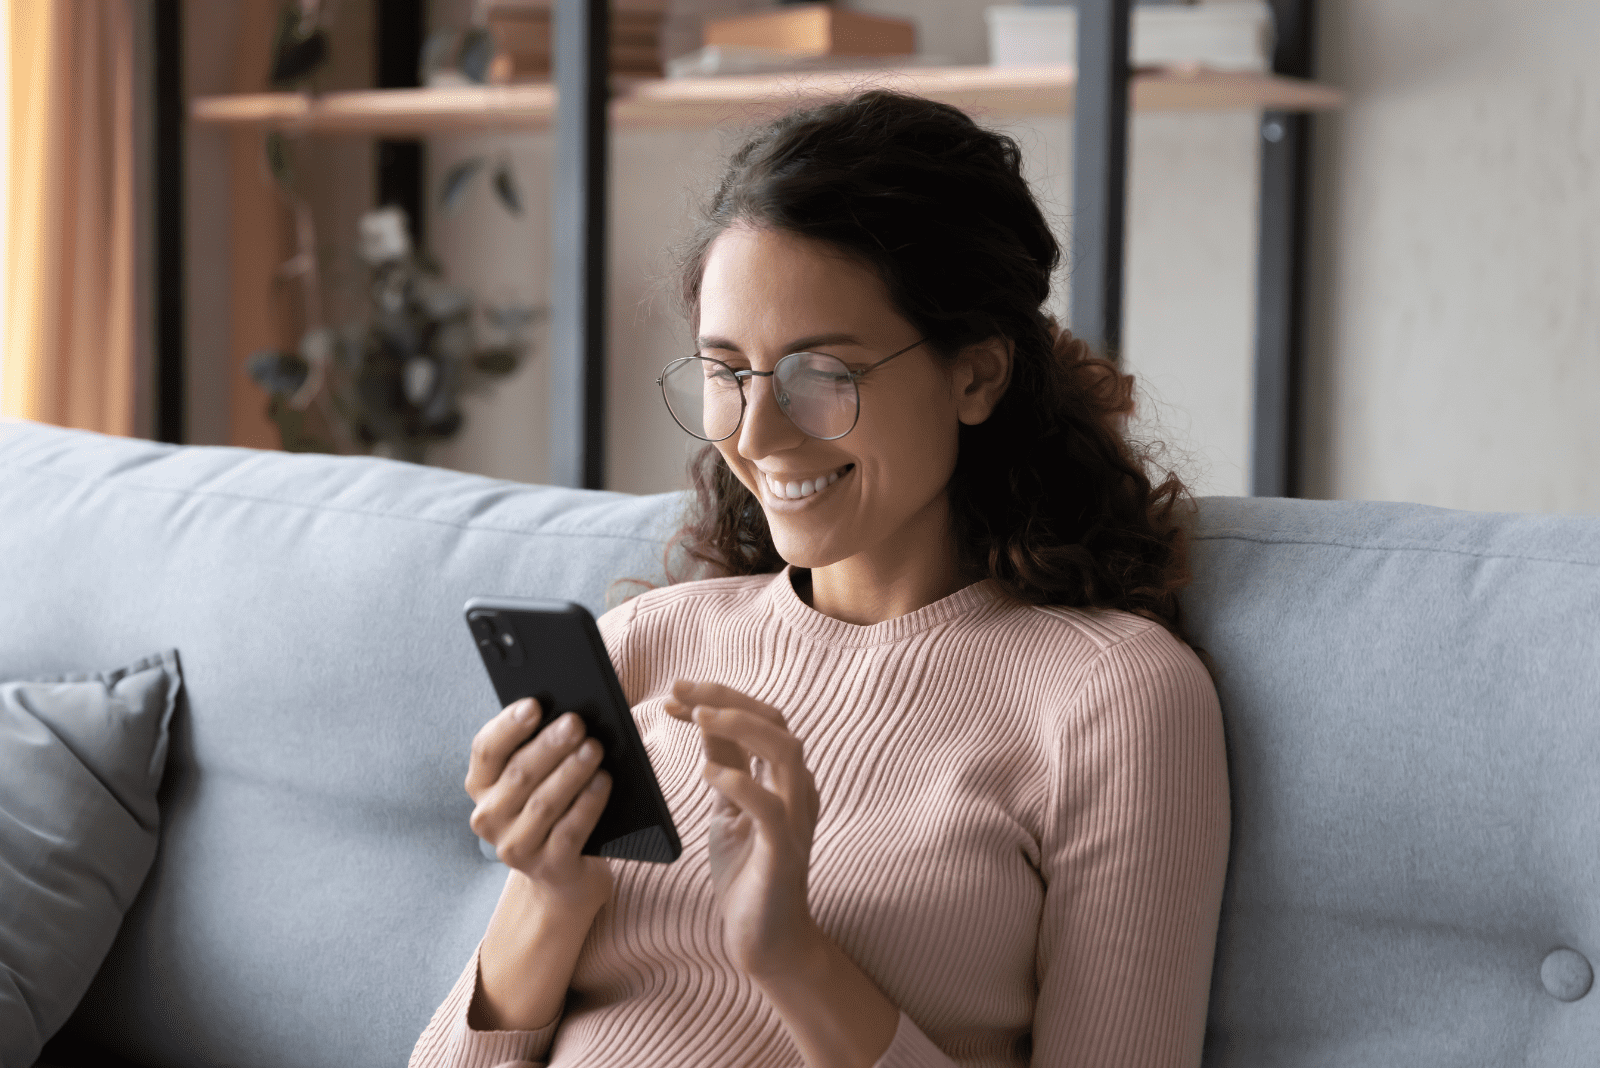 a smiling woman with glasses is sitting on the couch and typing on a mobile phone